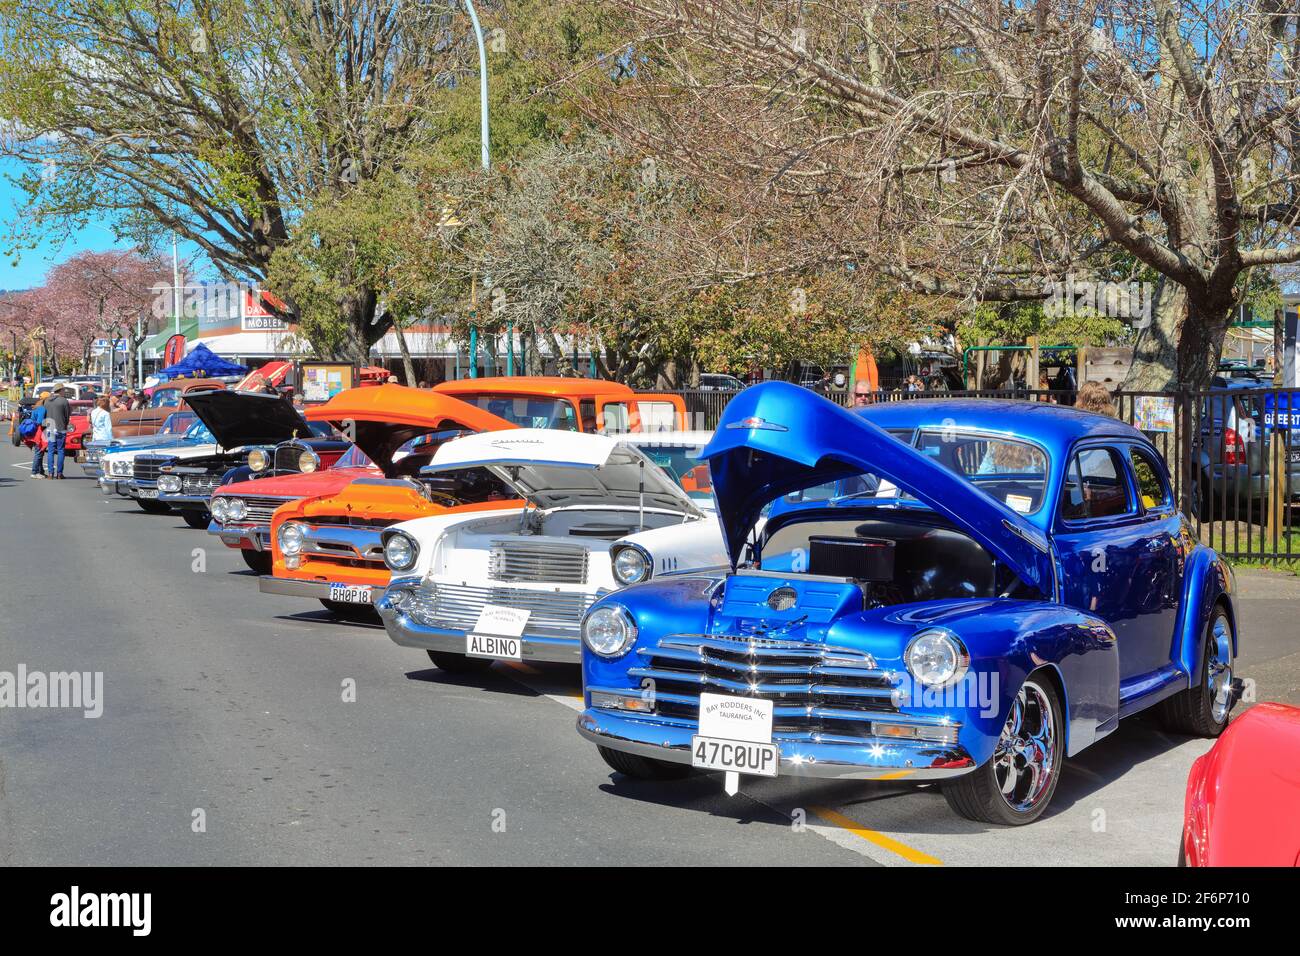 A row of classic cars at a car show. In the foreground is a blue 1947 Chevrolet Fleetmaster Coupe Stock Photo